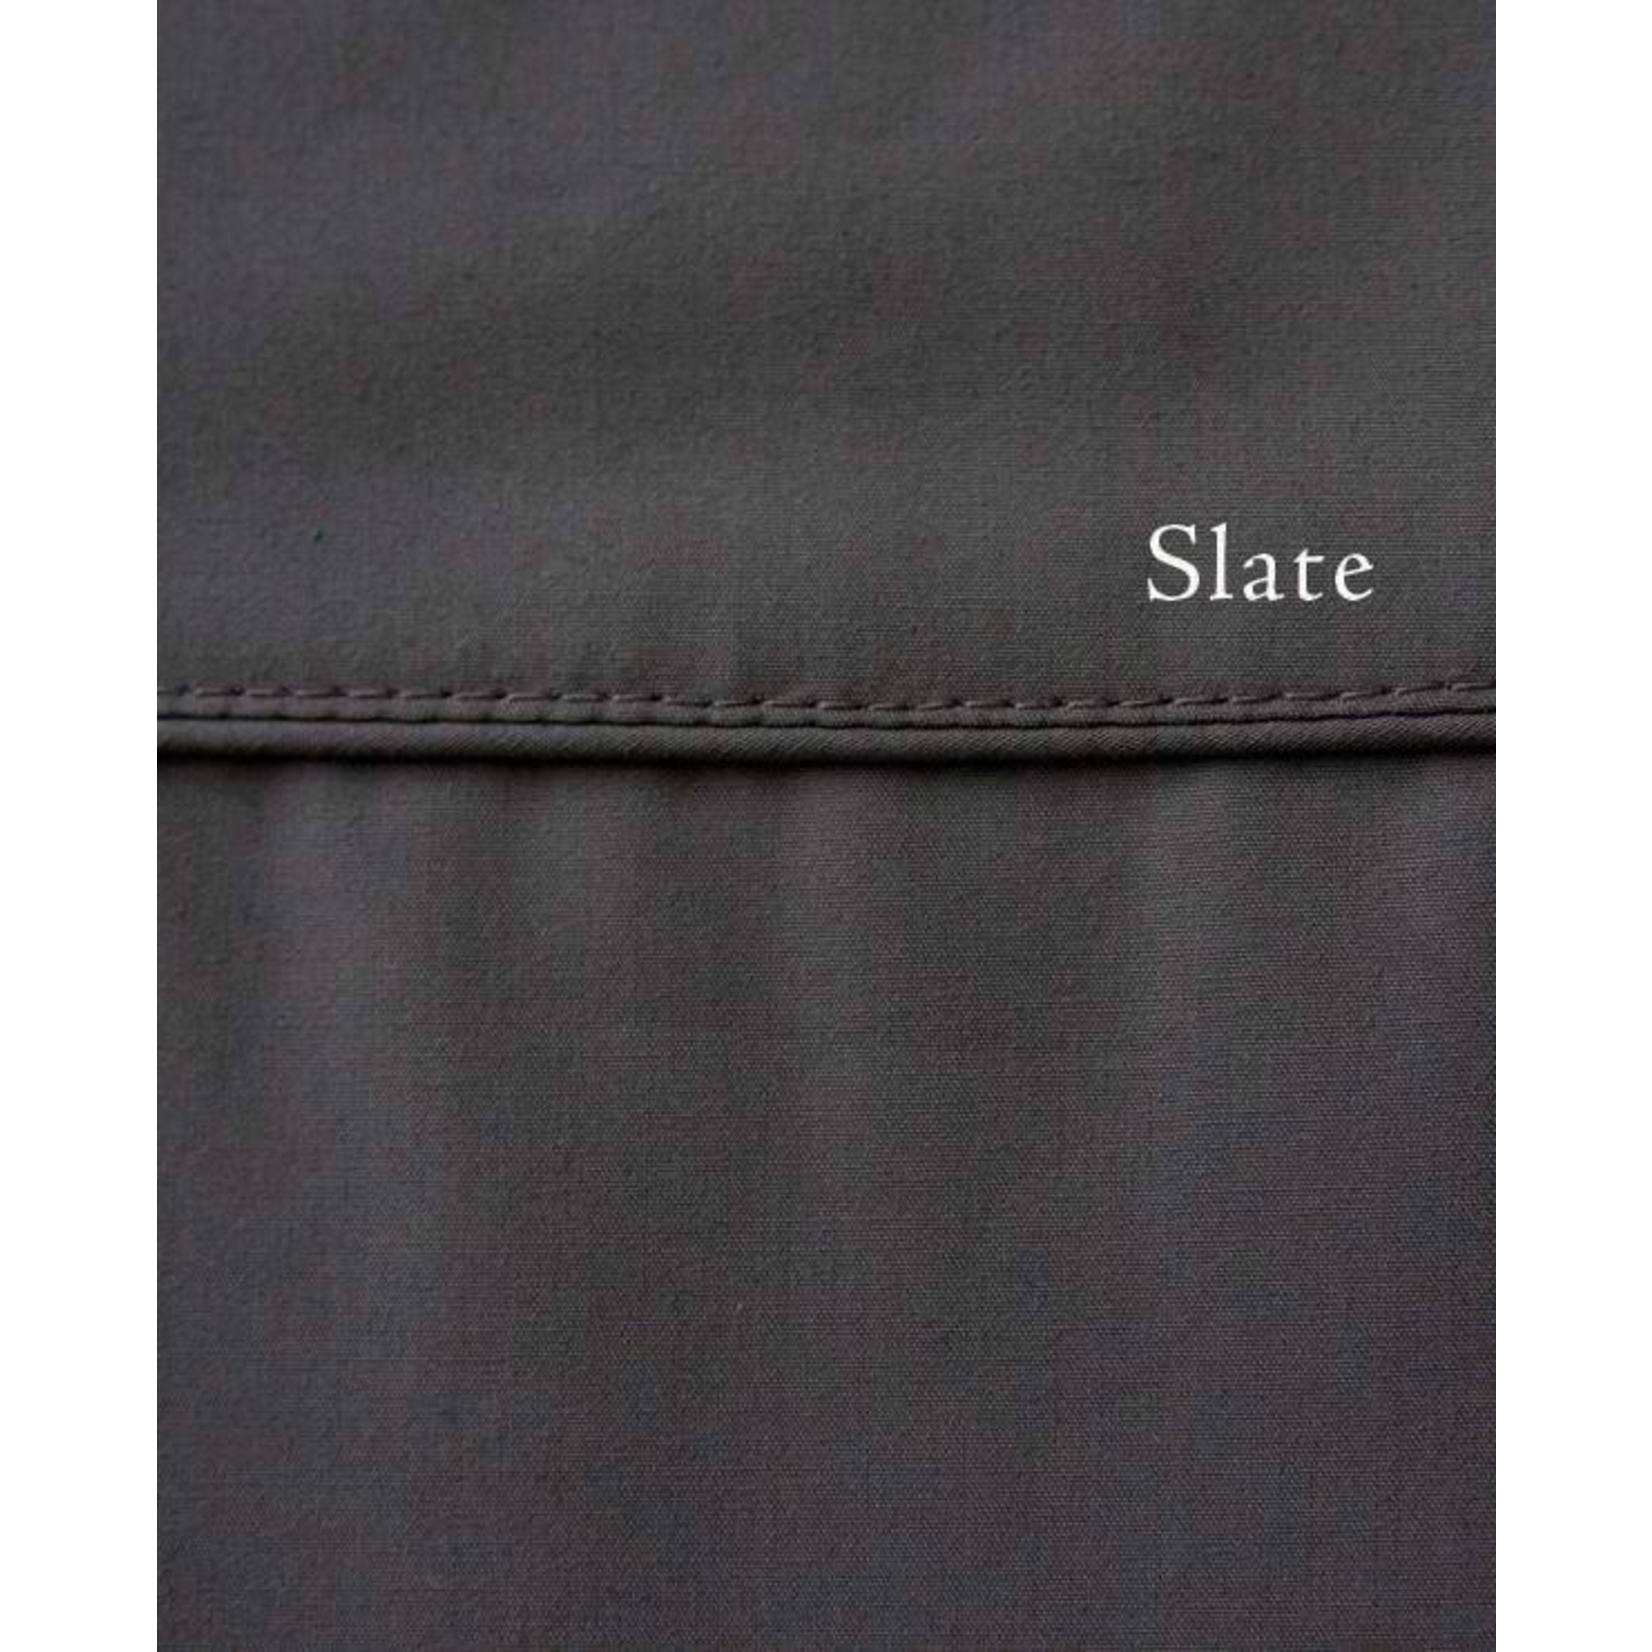 Cuddle Down Percale Deluxe Sheet, King Flat, #92 Slate